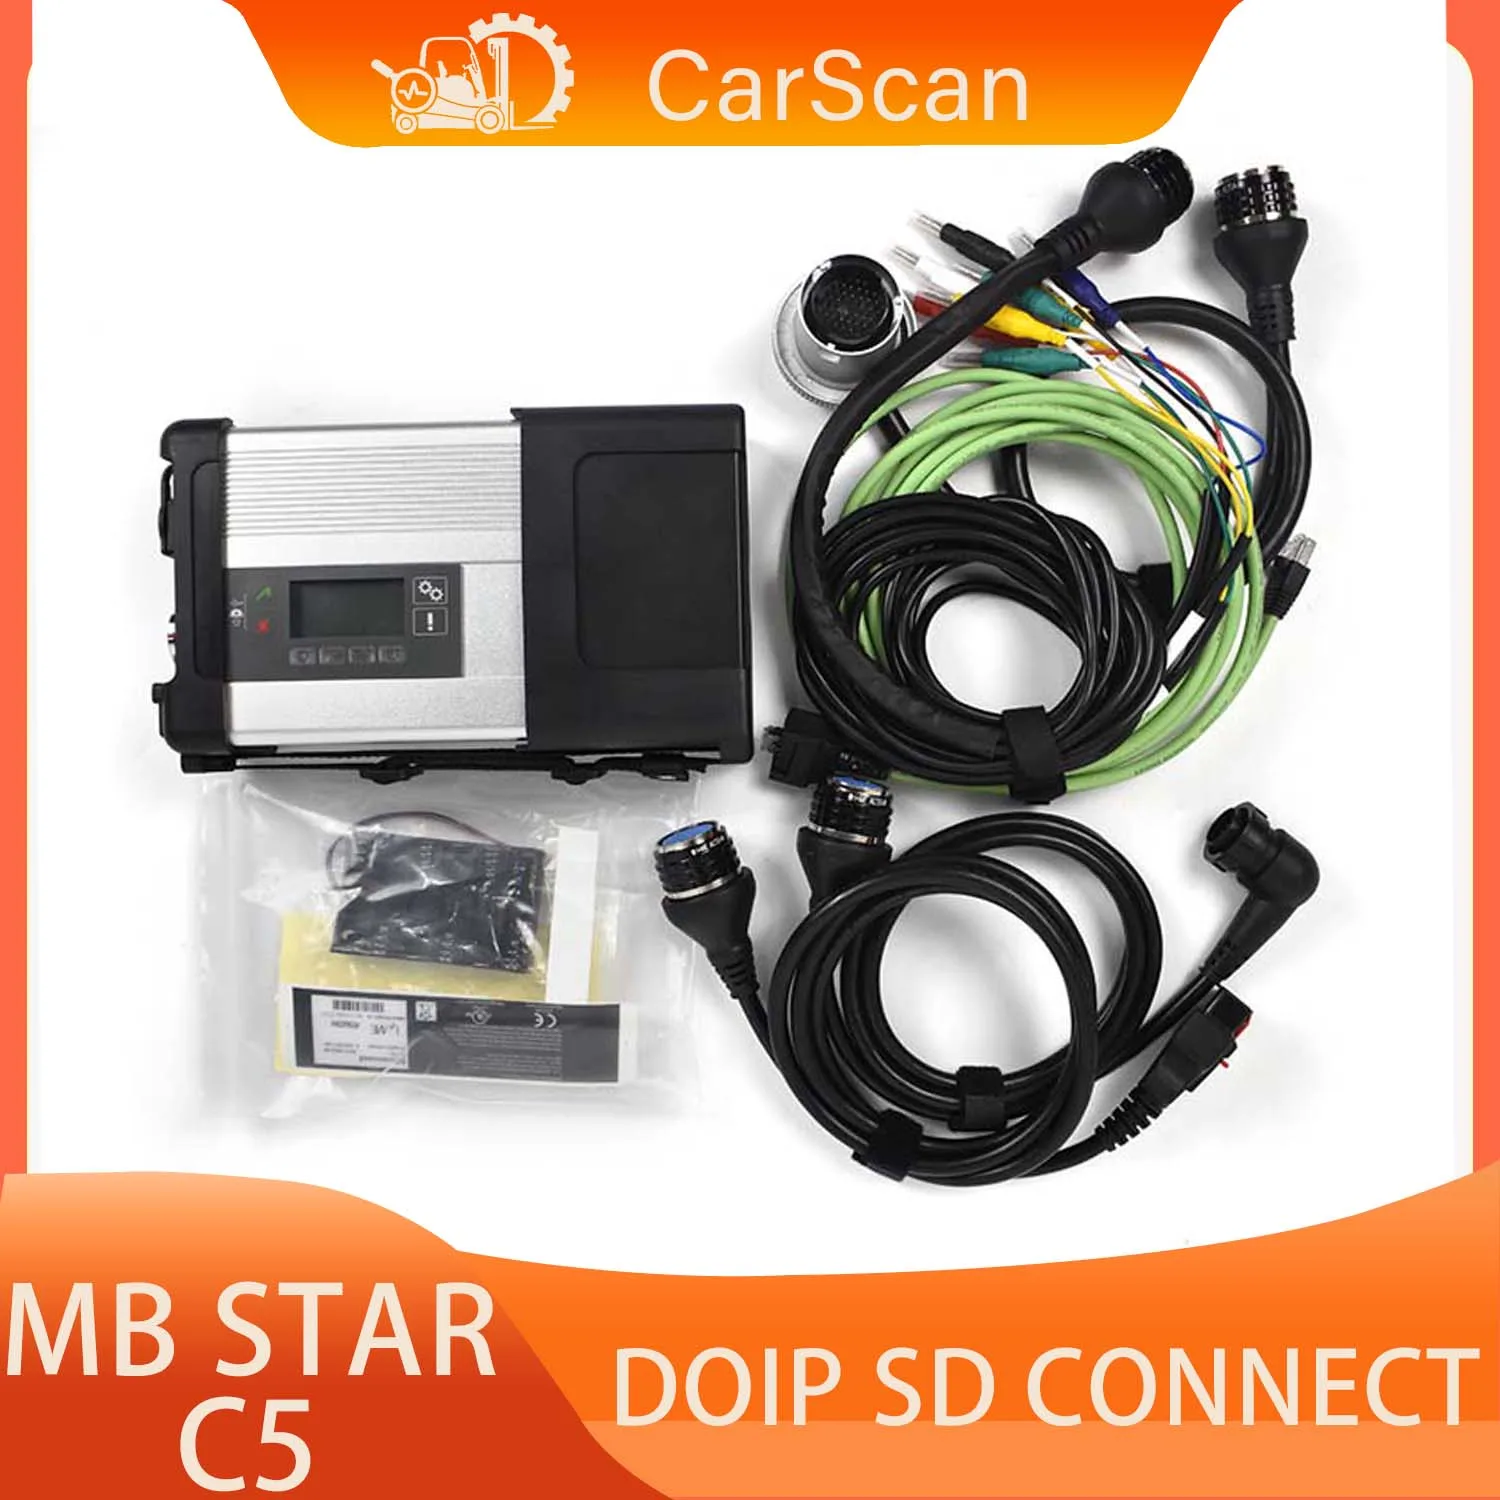 

CarScan MB Star C5 Sd Connect Multiplexer Compact Cars/ Trucks Diagnosis Software 480gb SSd WINDOWS 10